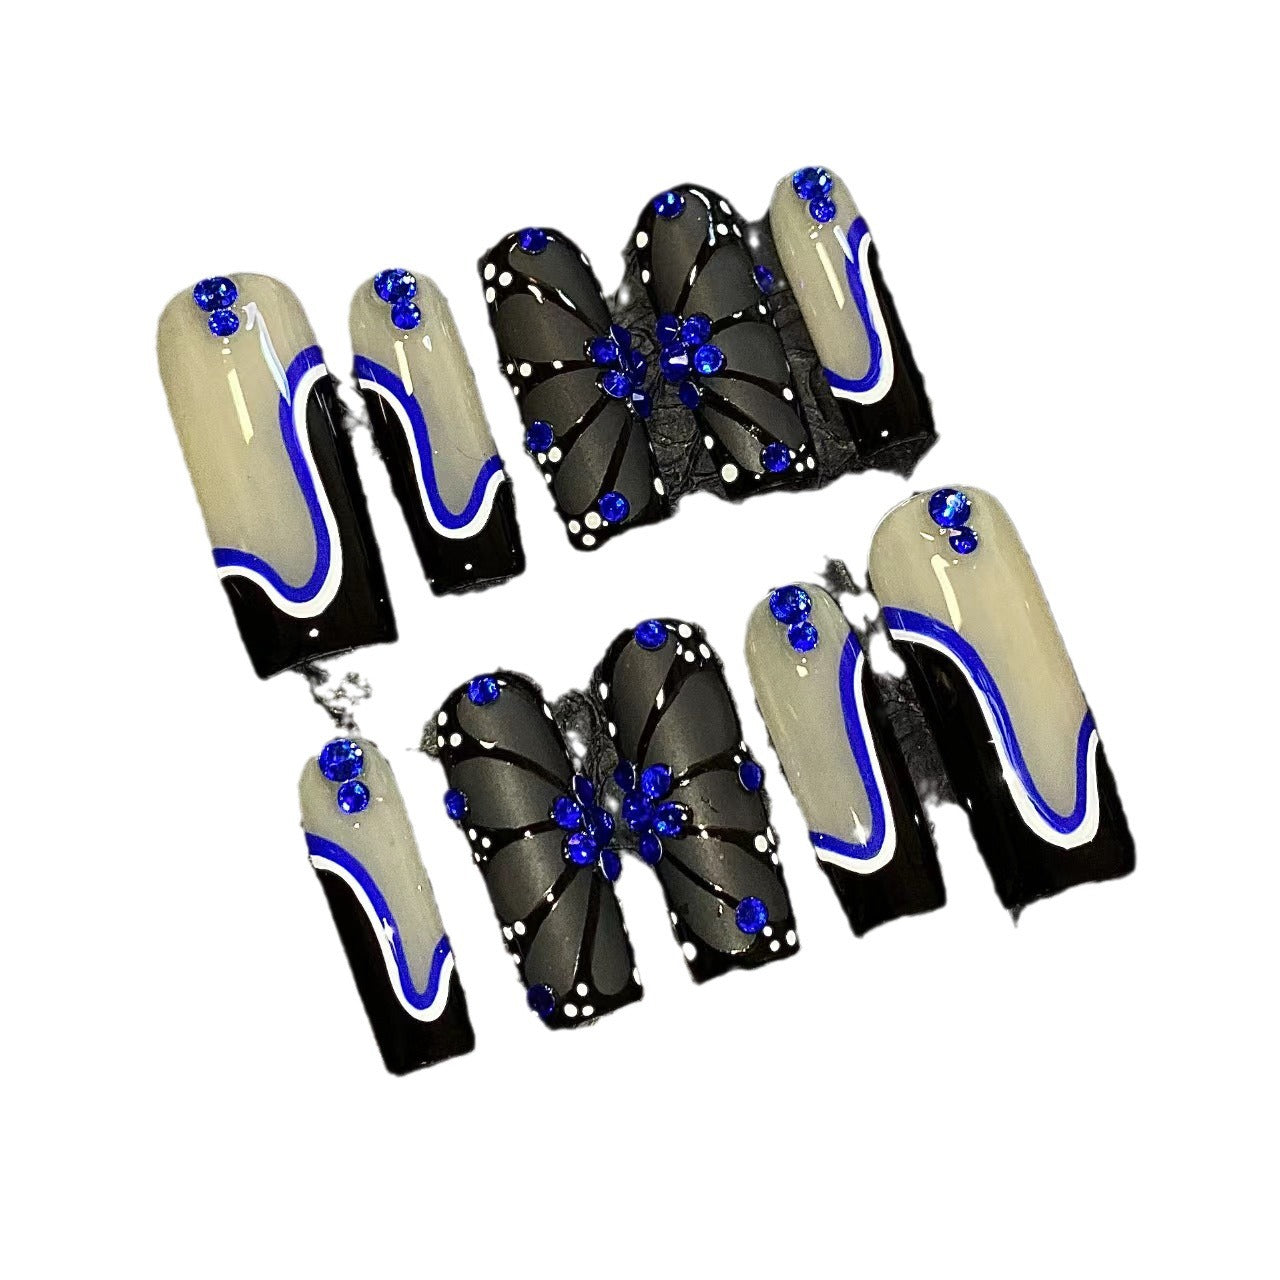 BLUE FLASH-TEN PIECES OF HANDCRAFTED PRESS ON NAIL